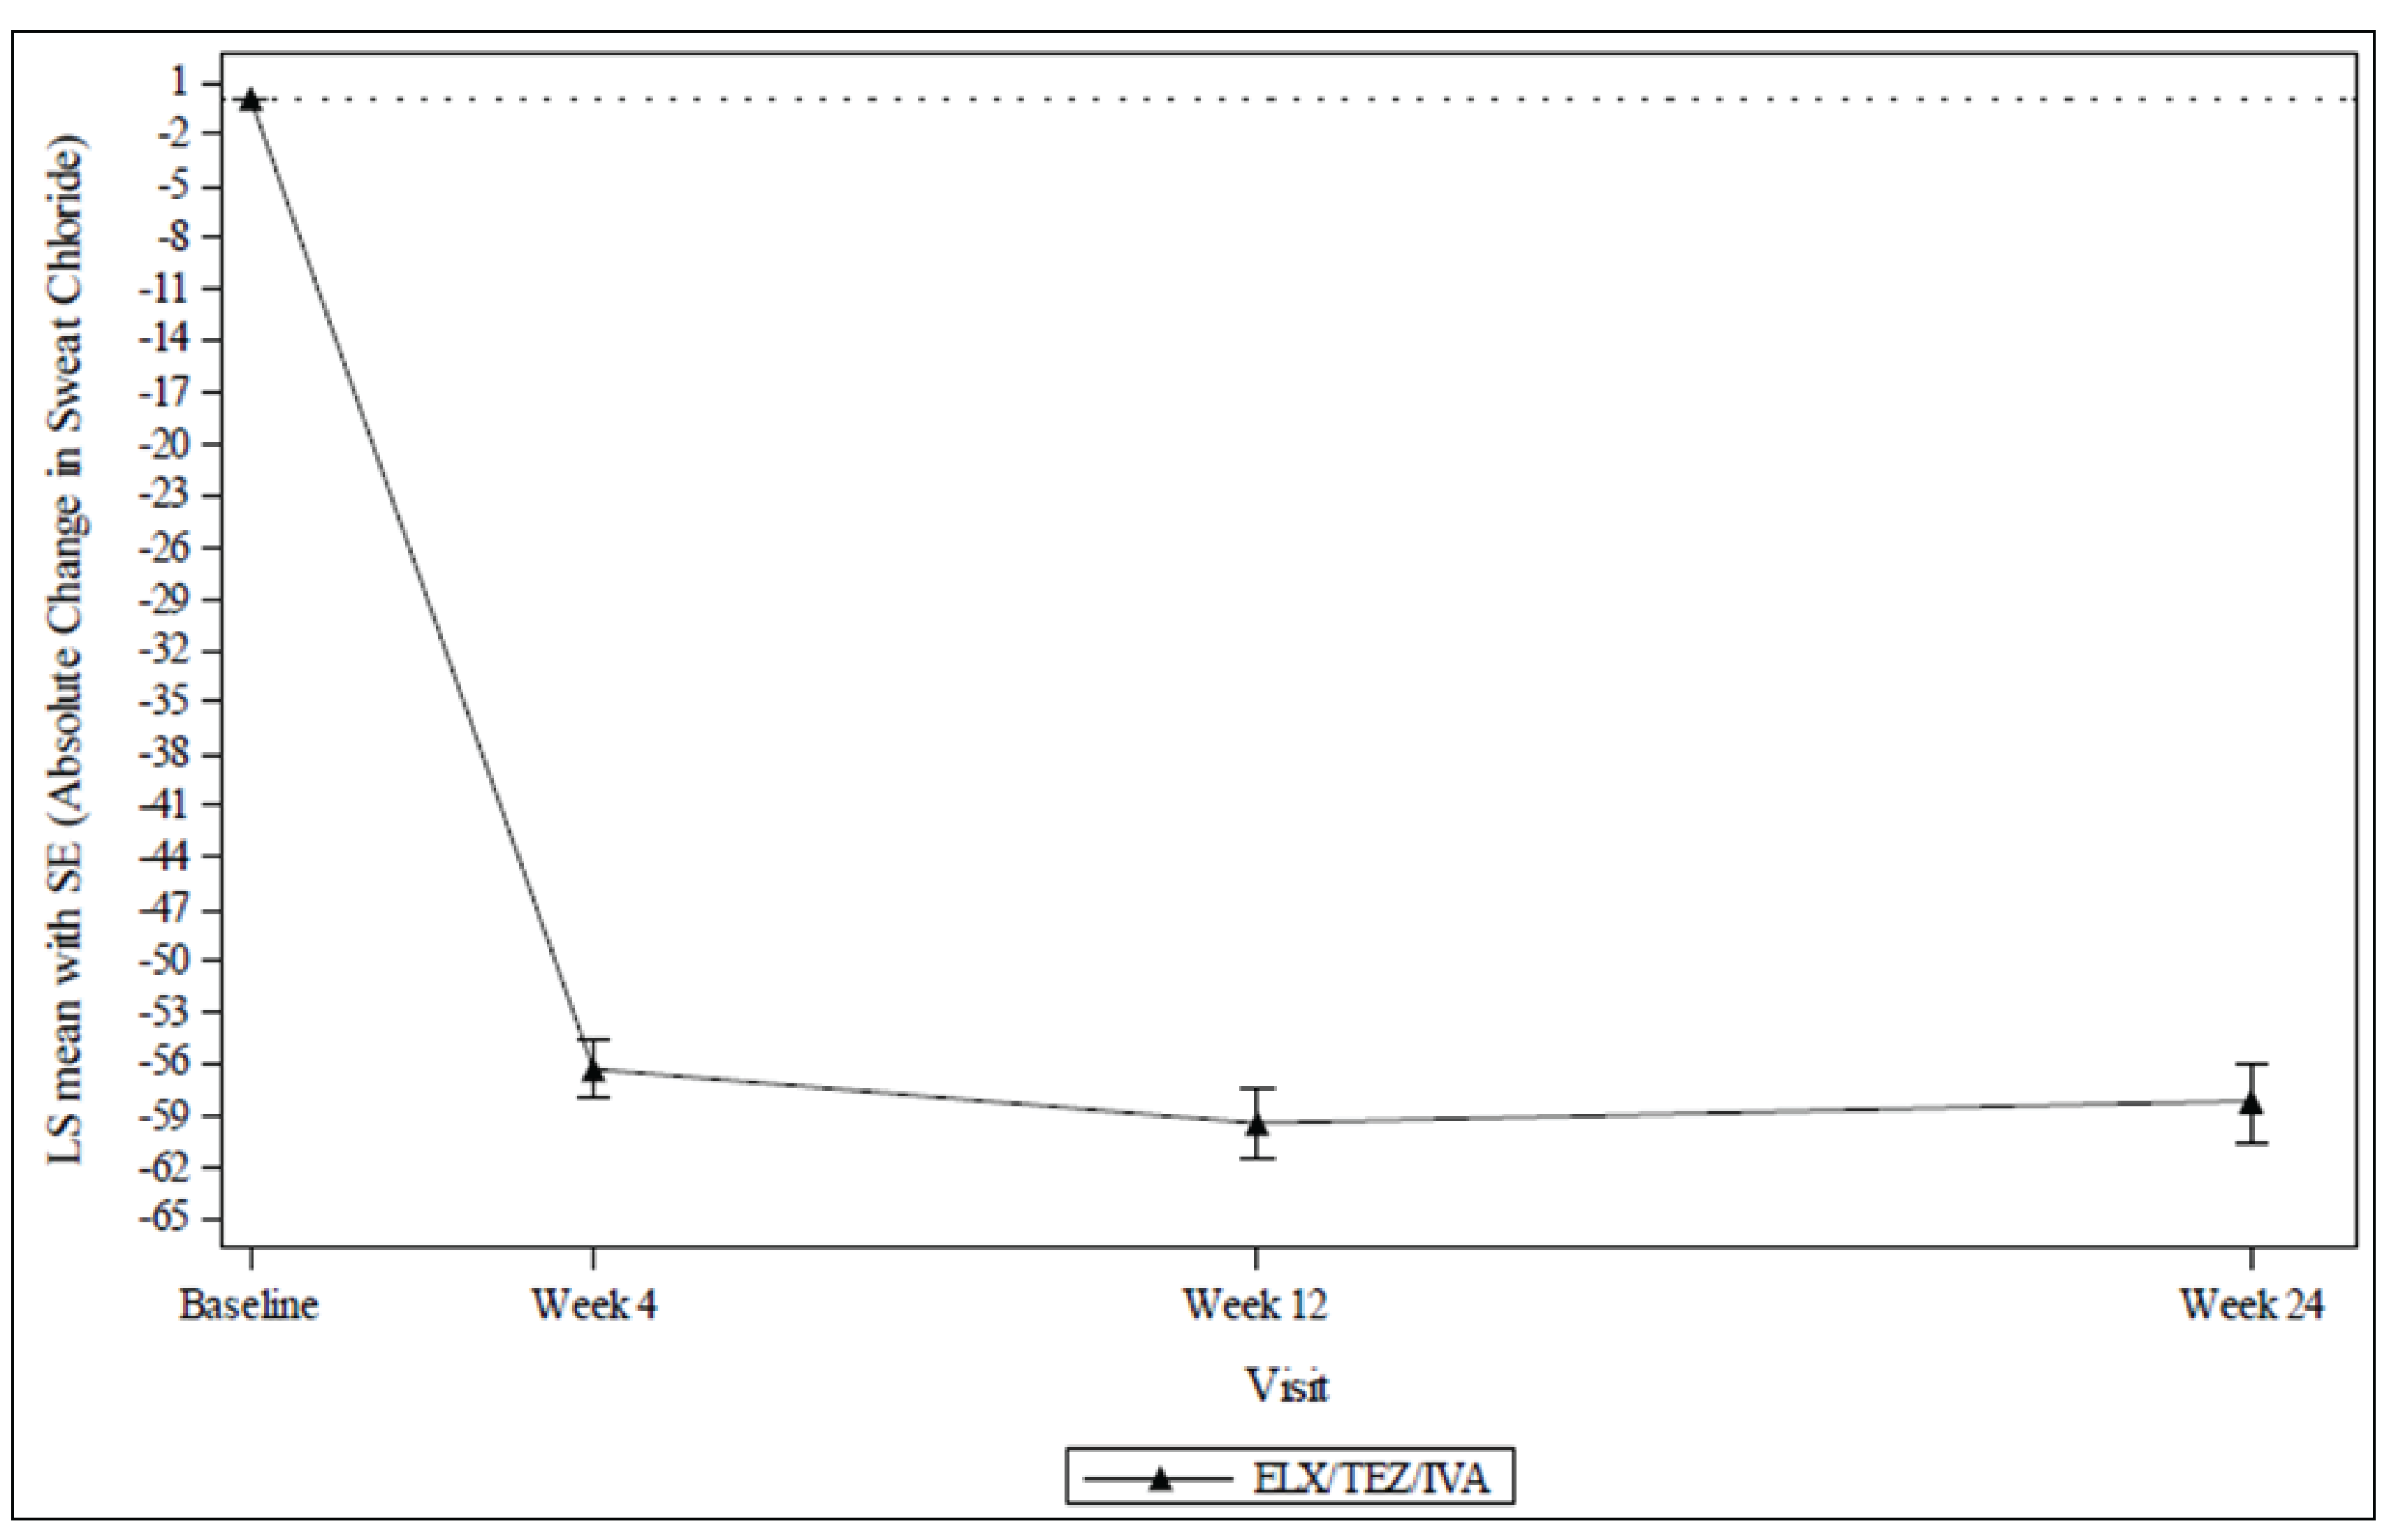 Figure shows the absolute change from baseline in sweat chloride at weeks 4, 12, and 24. Treatment with ELX-TEZ-IVA resulted in an improvement (reduction) in SwCl by week 4 that was sustained throughout the treatment period.